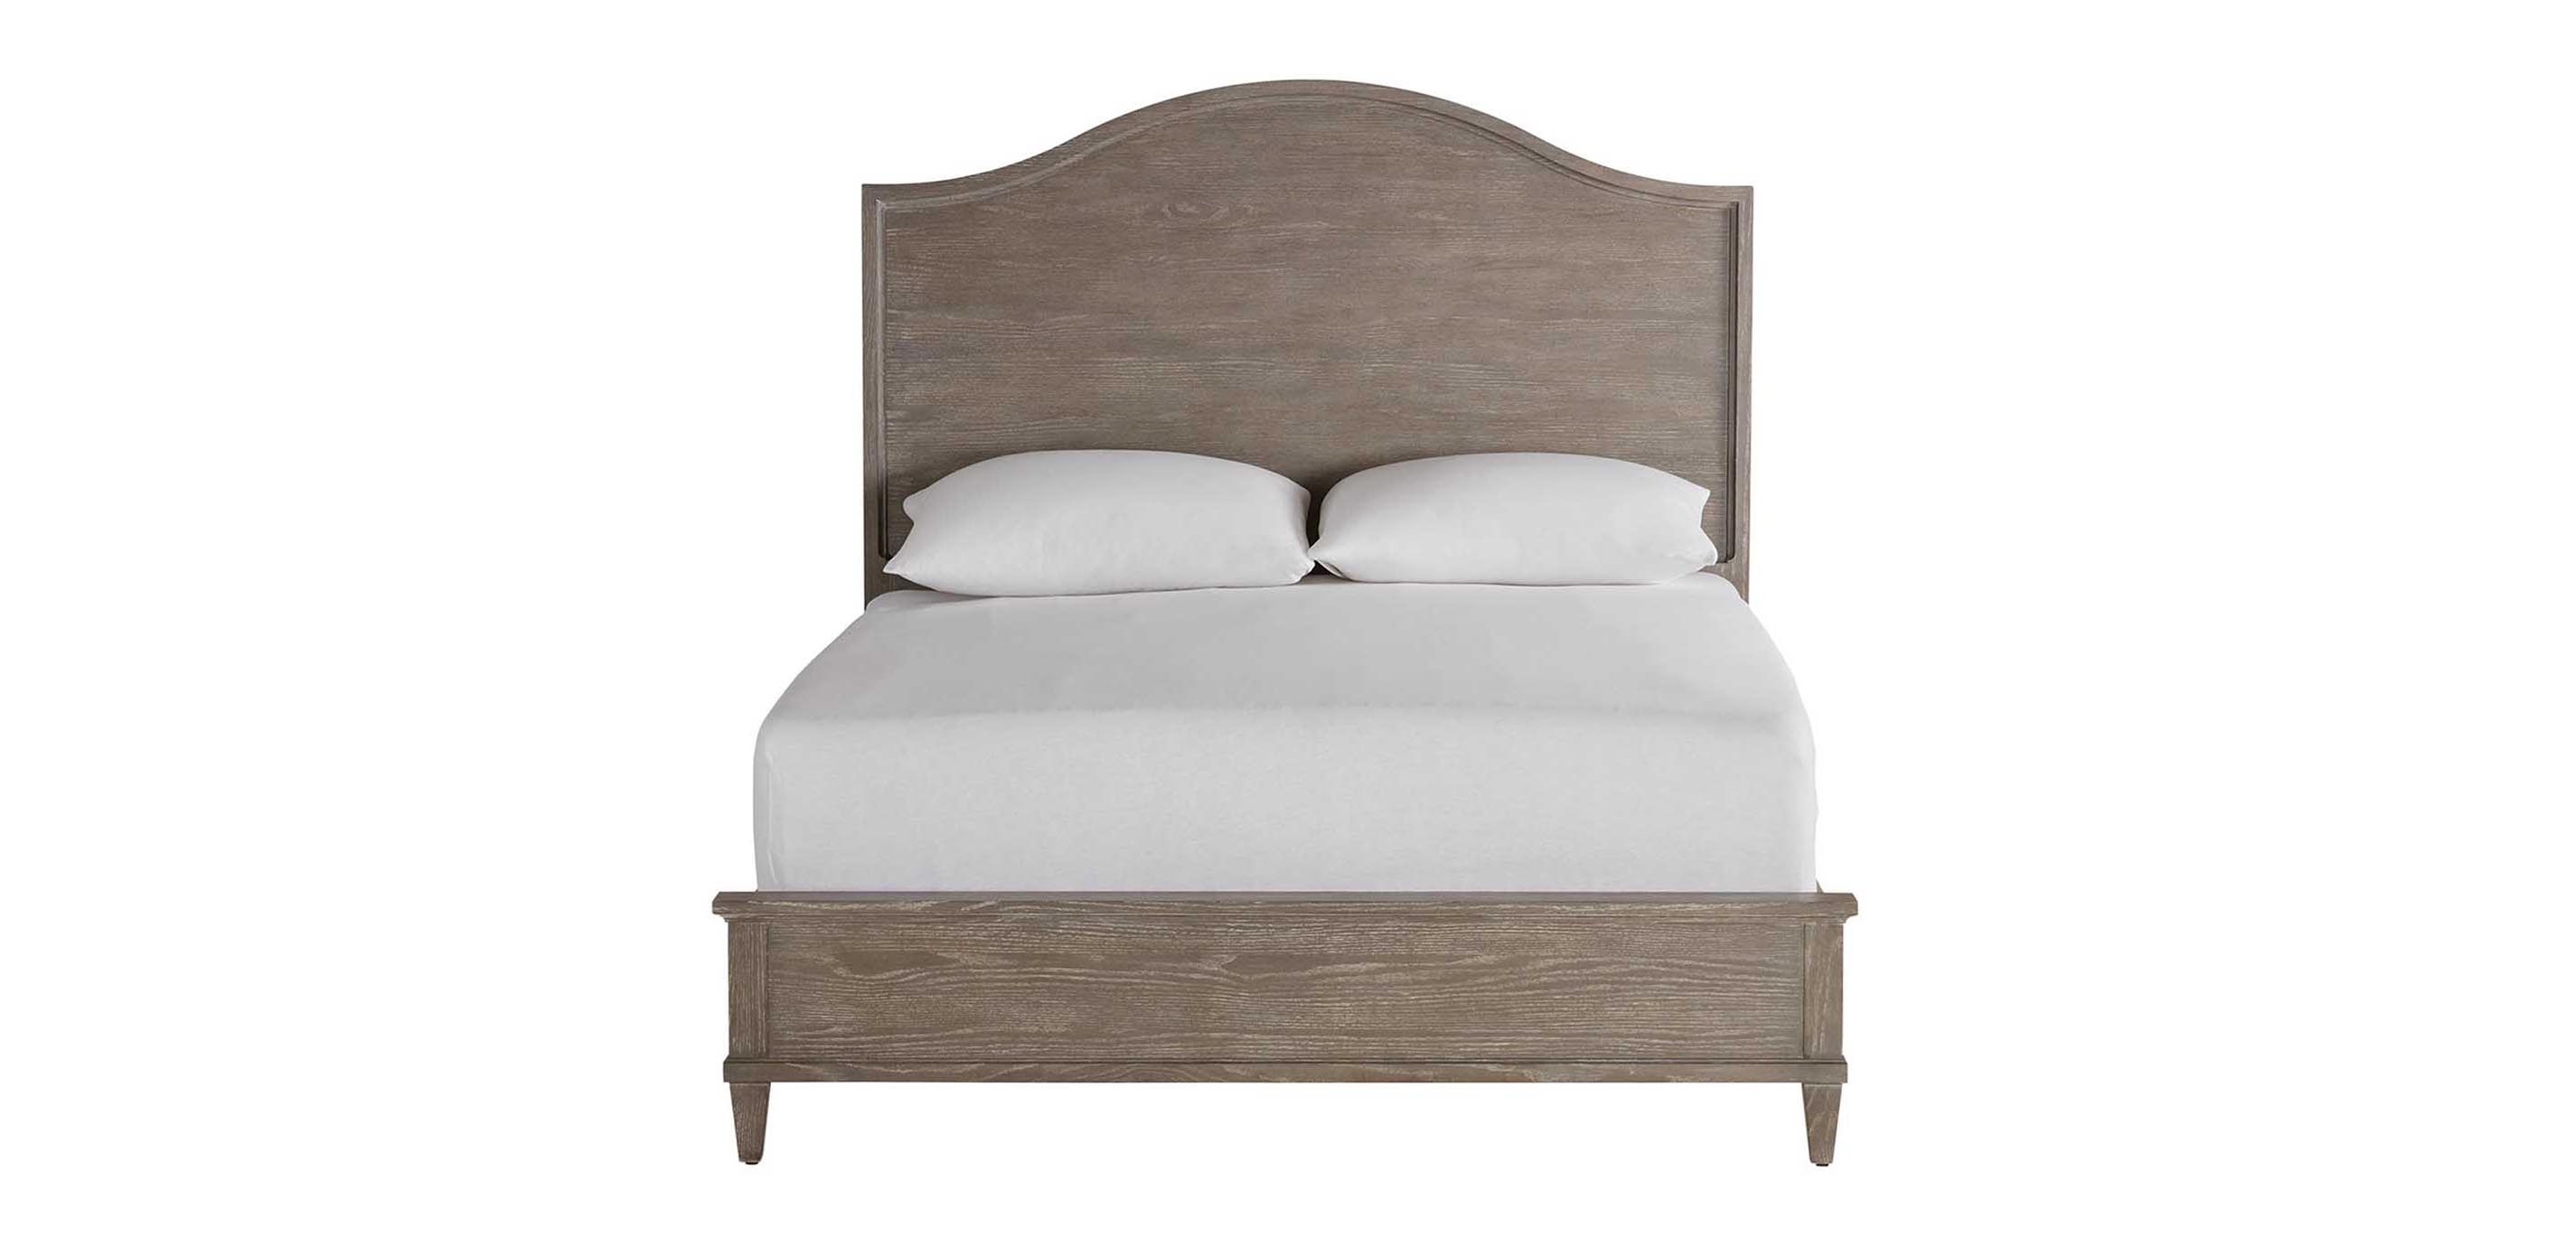 Clermont Bed With Arched Wooden, Solid Wood Headboards King Size Beds